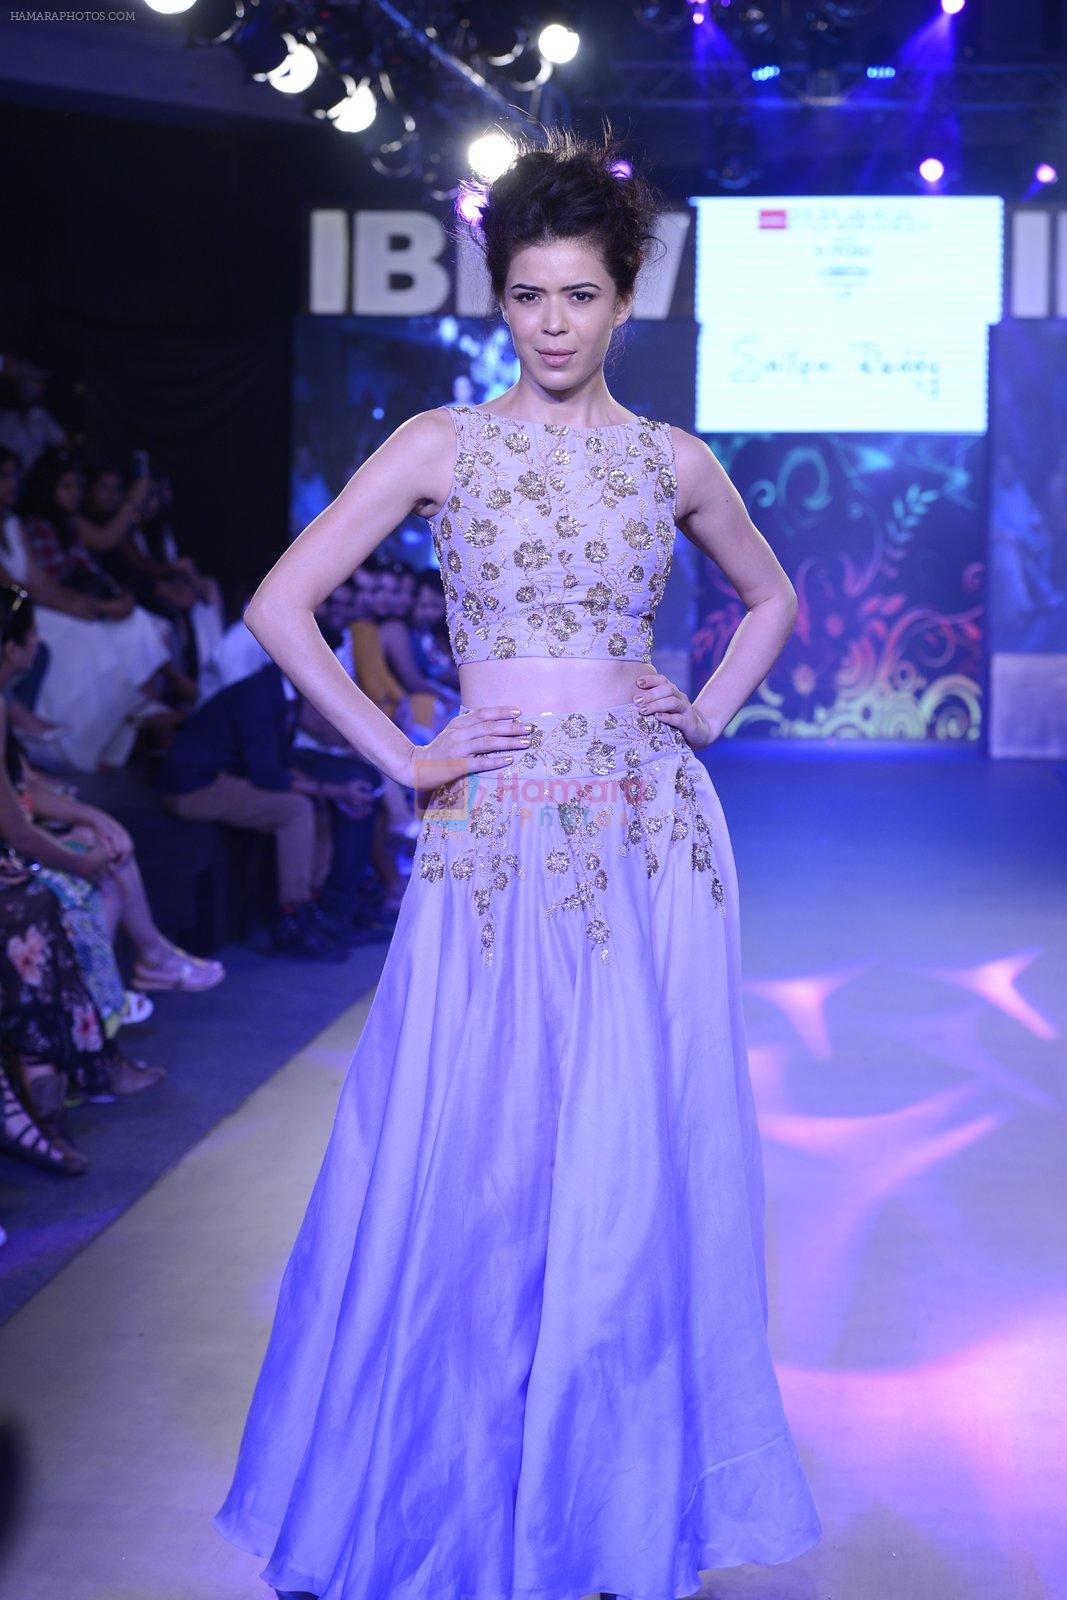 Model walk the ramp for Shilpa Reddy Studio Show on day 2 of Gionee India Beach Fashion Week on 30th Oct 2015